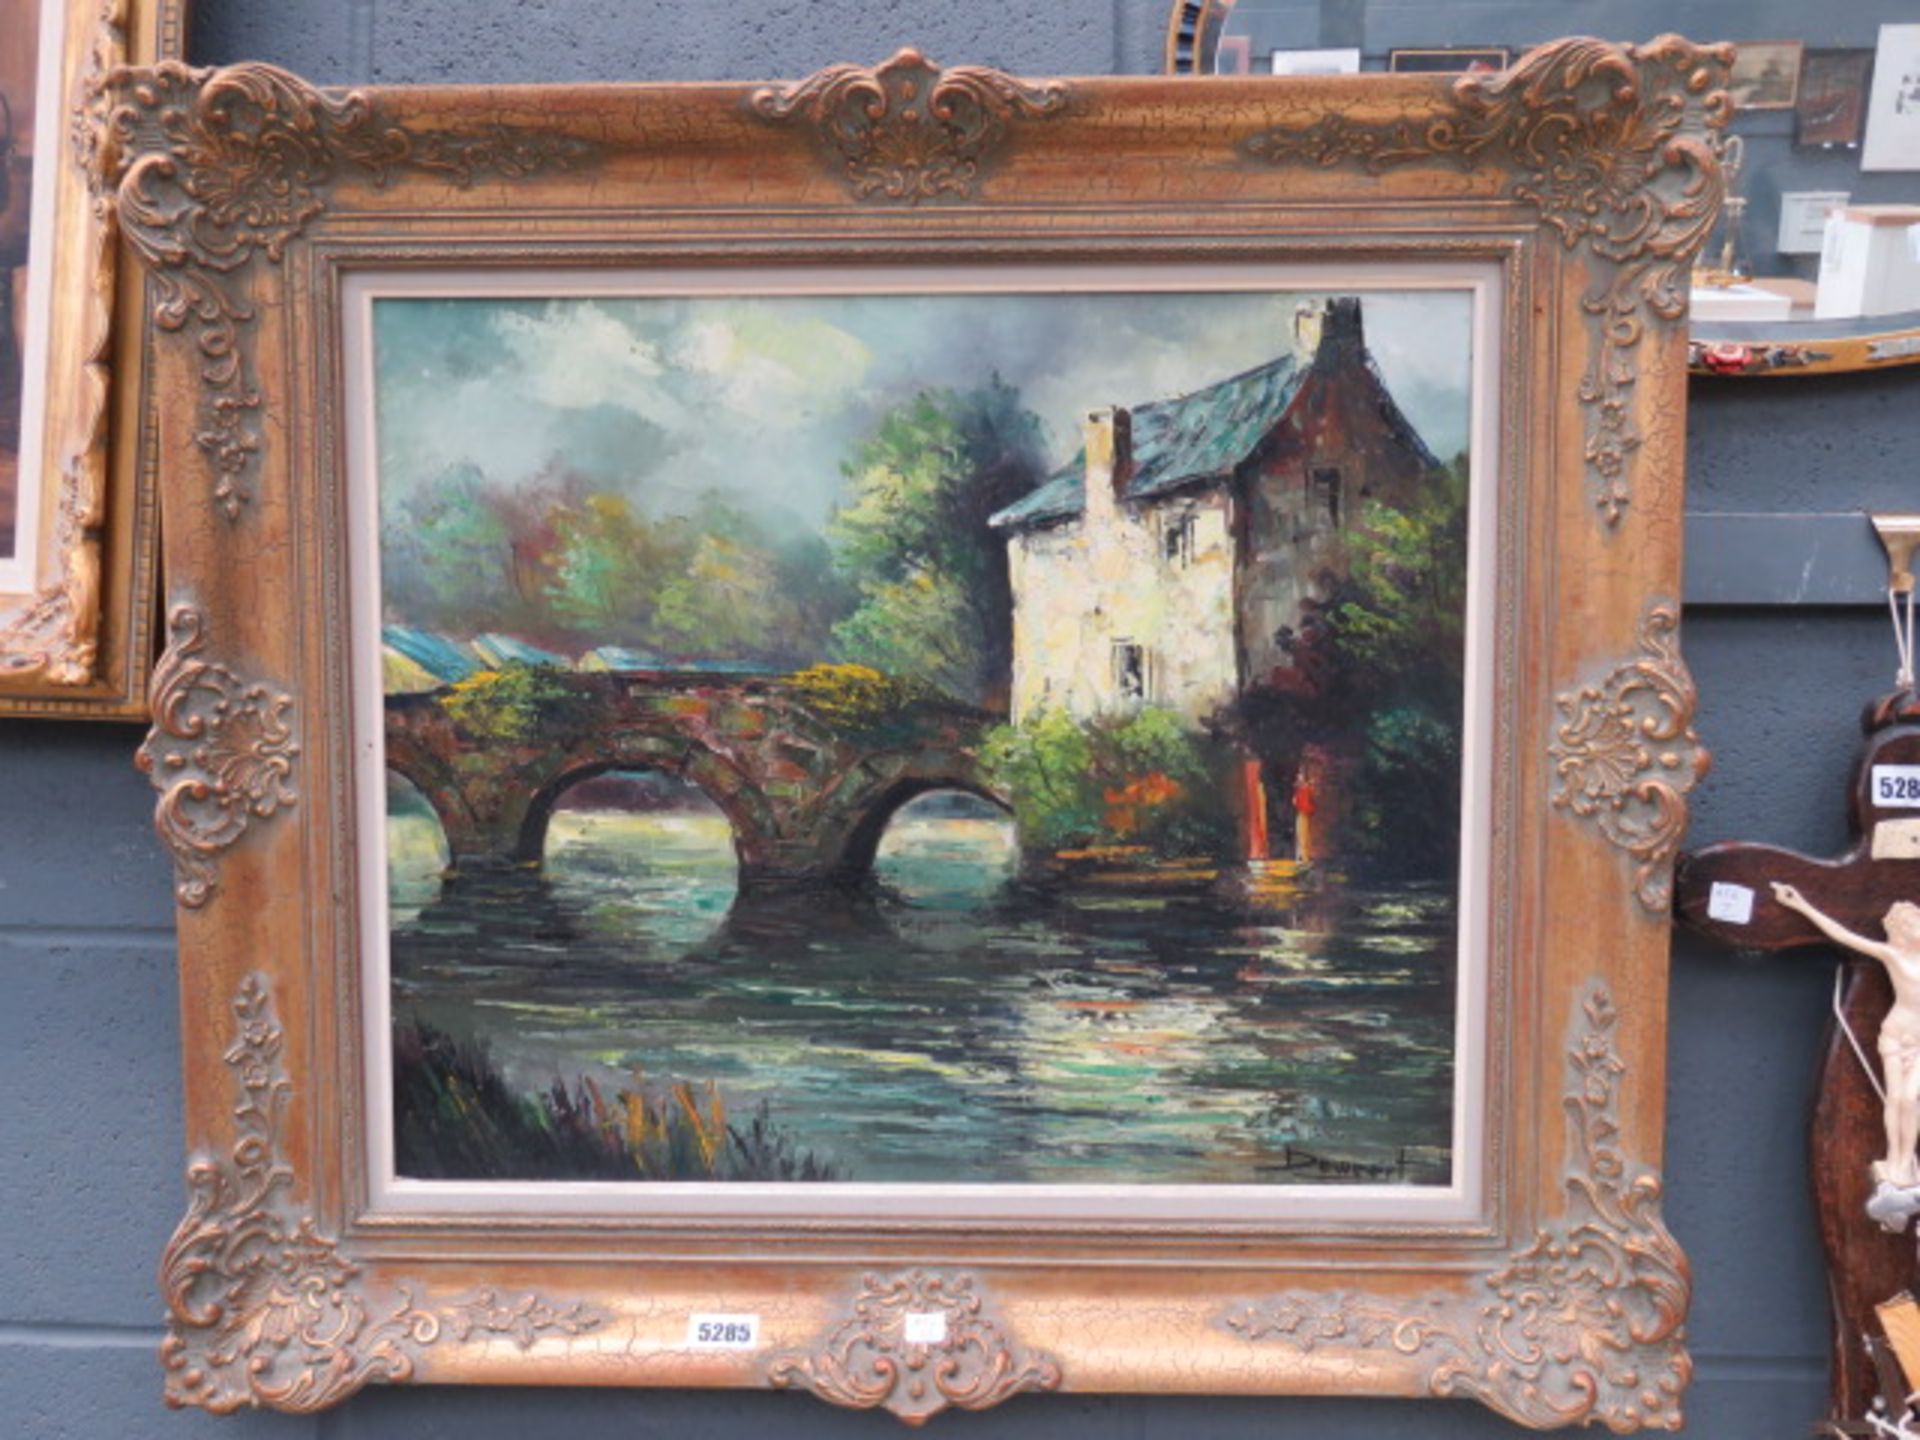 (22) Oil on canvas 'River with bridge and cottage' - Image 2 of 2